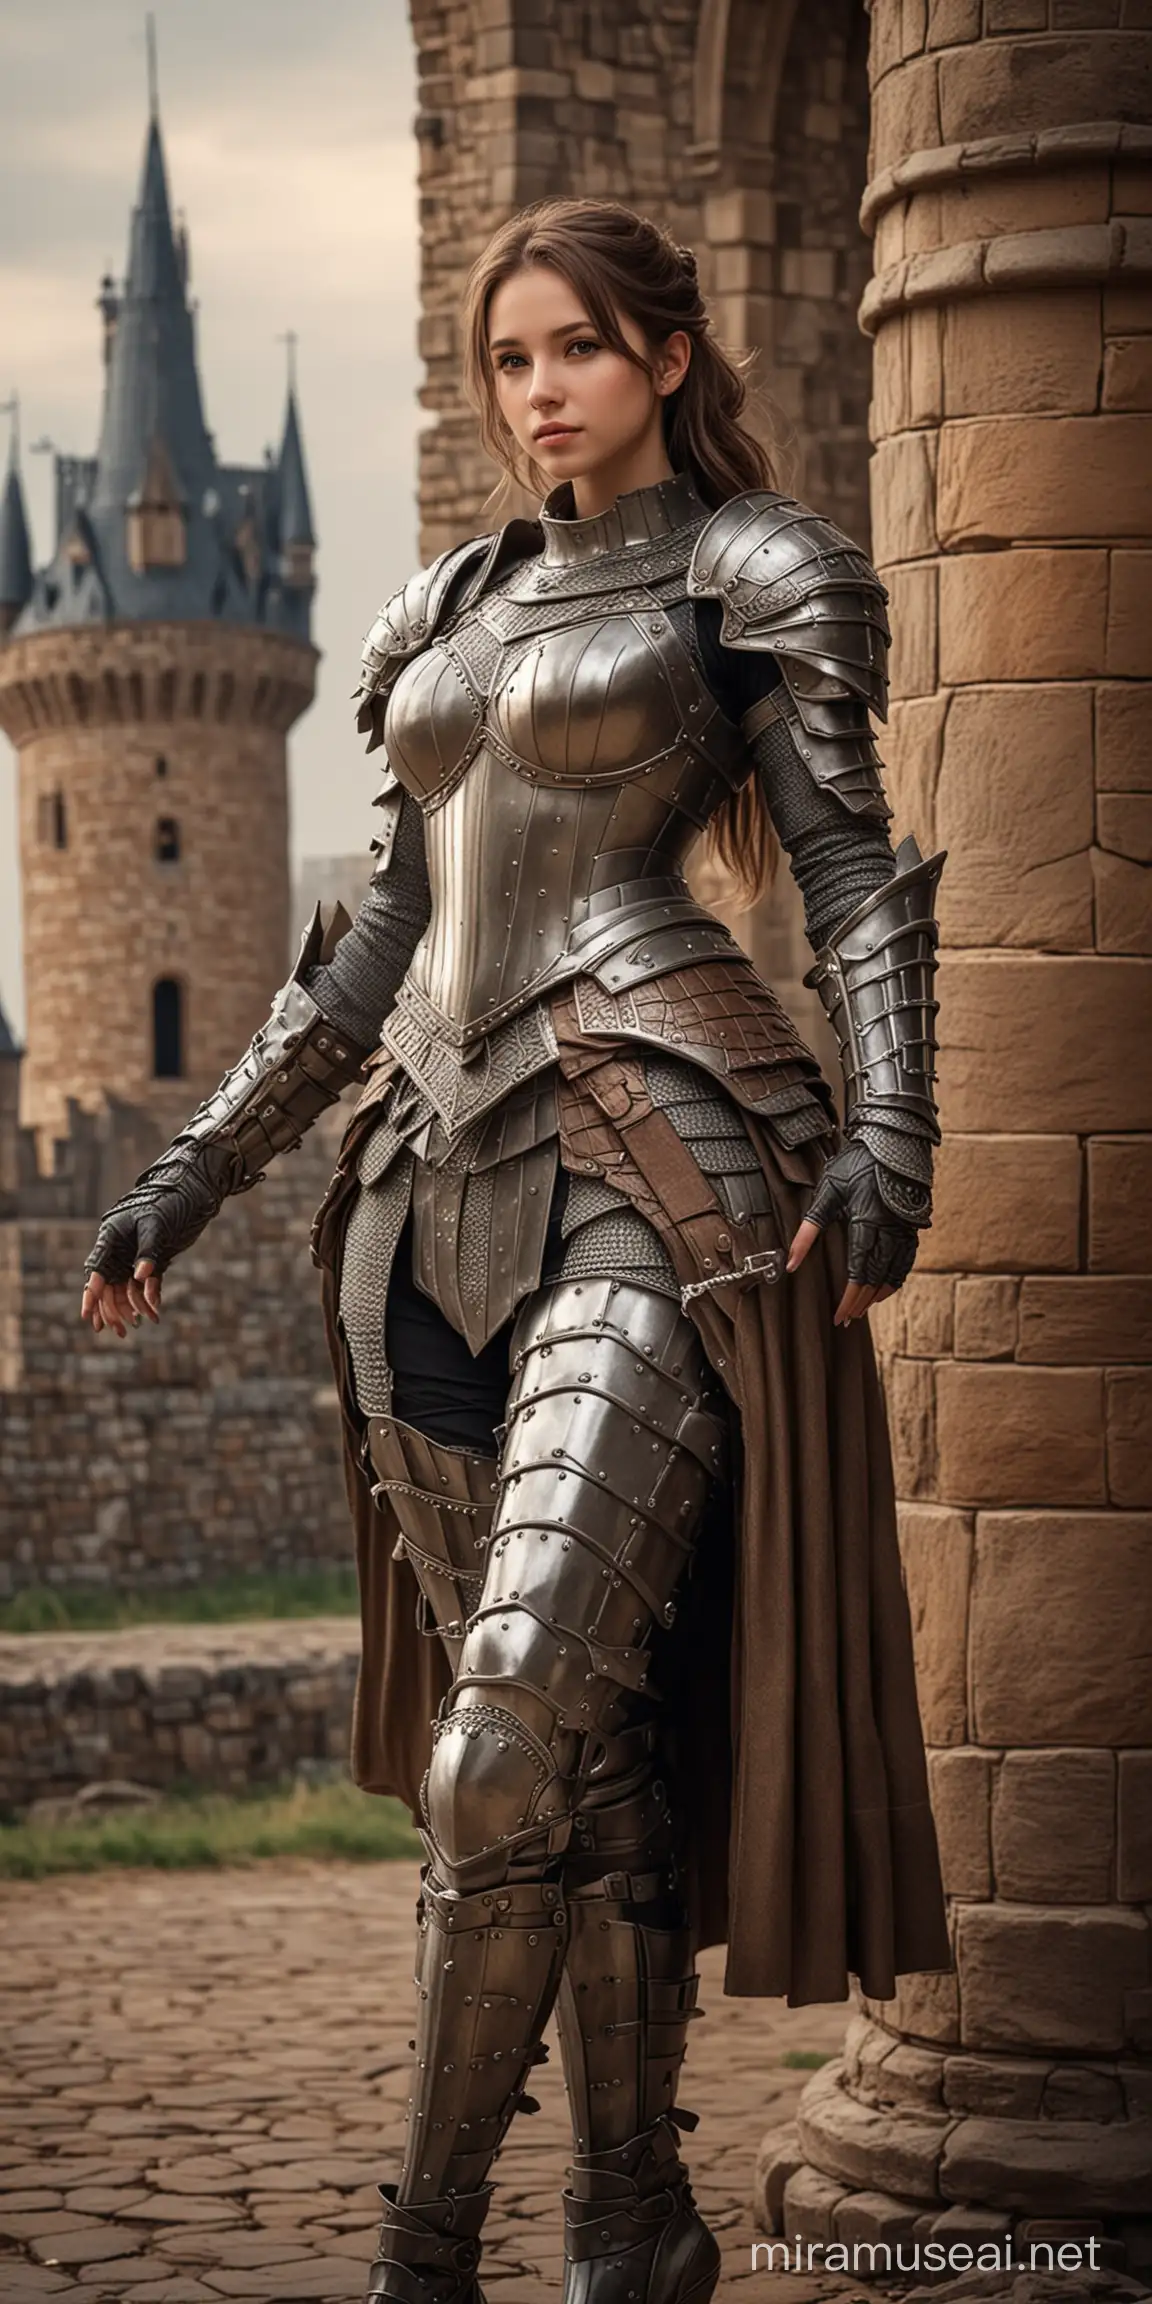 Elegant Knight with Armadillo Aesthetic in a Castle Setting